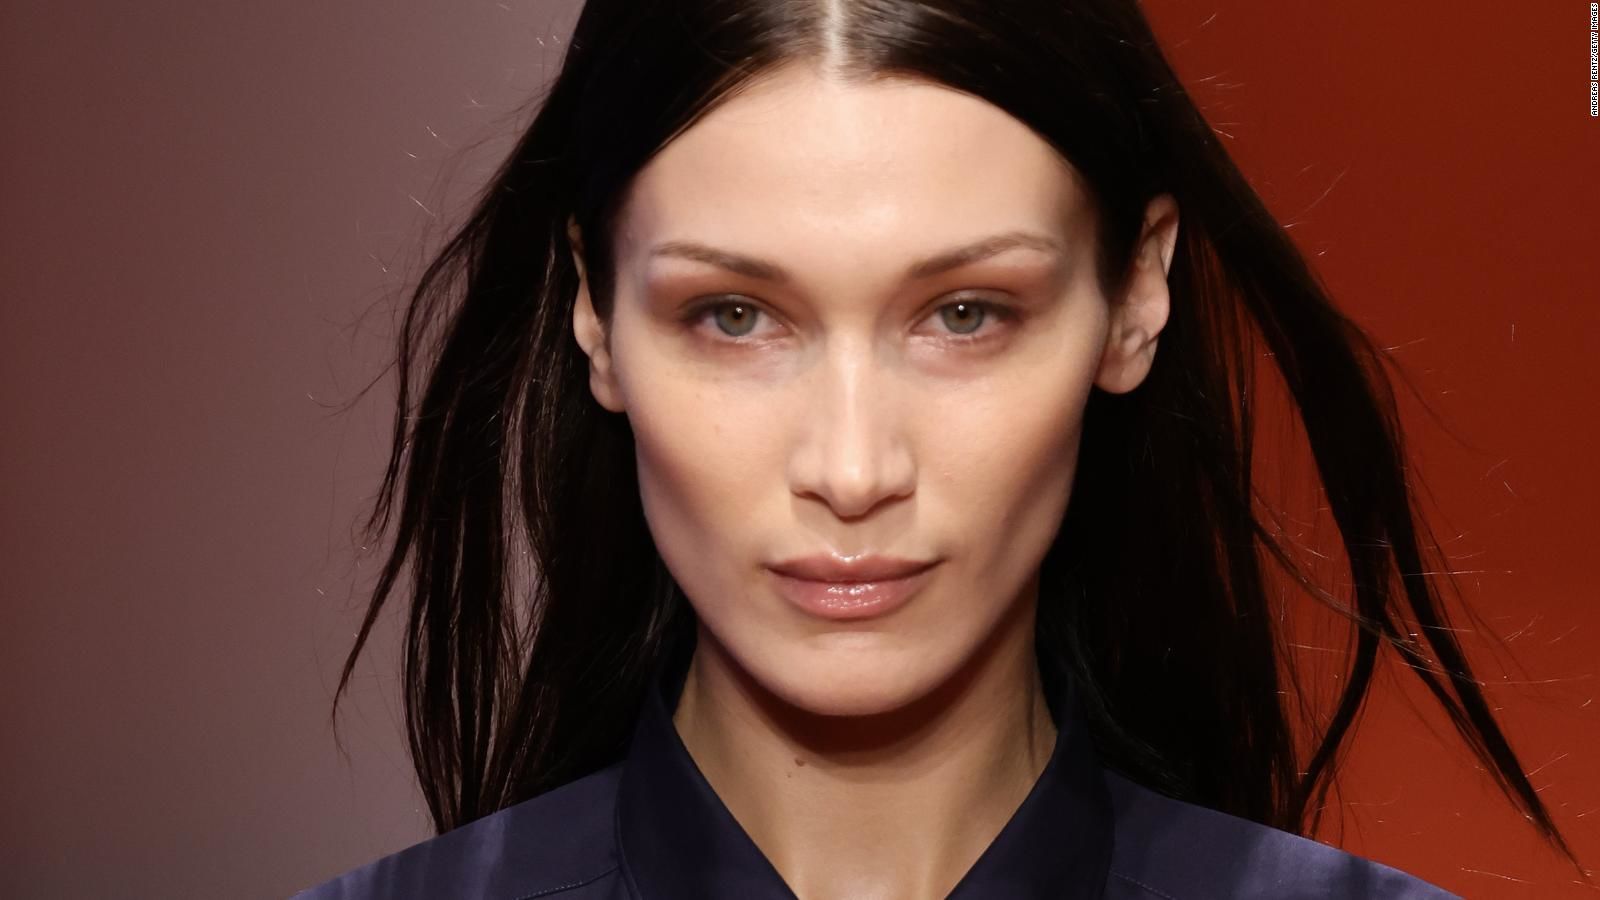 Bella Hadid claims she lost friends, jobs over anti-Israel stance